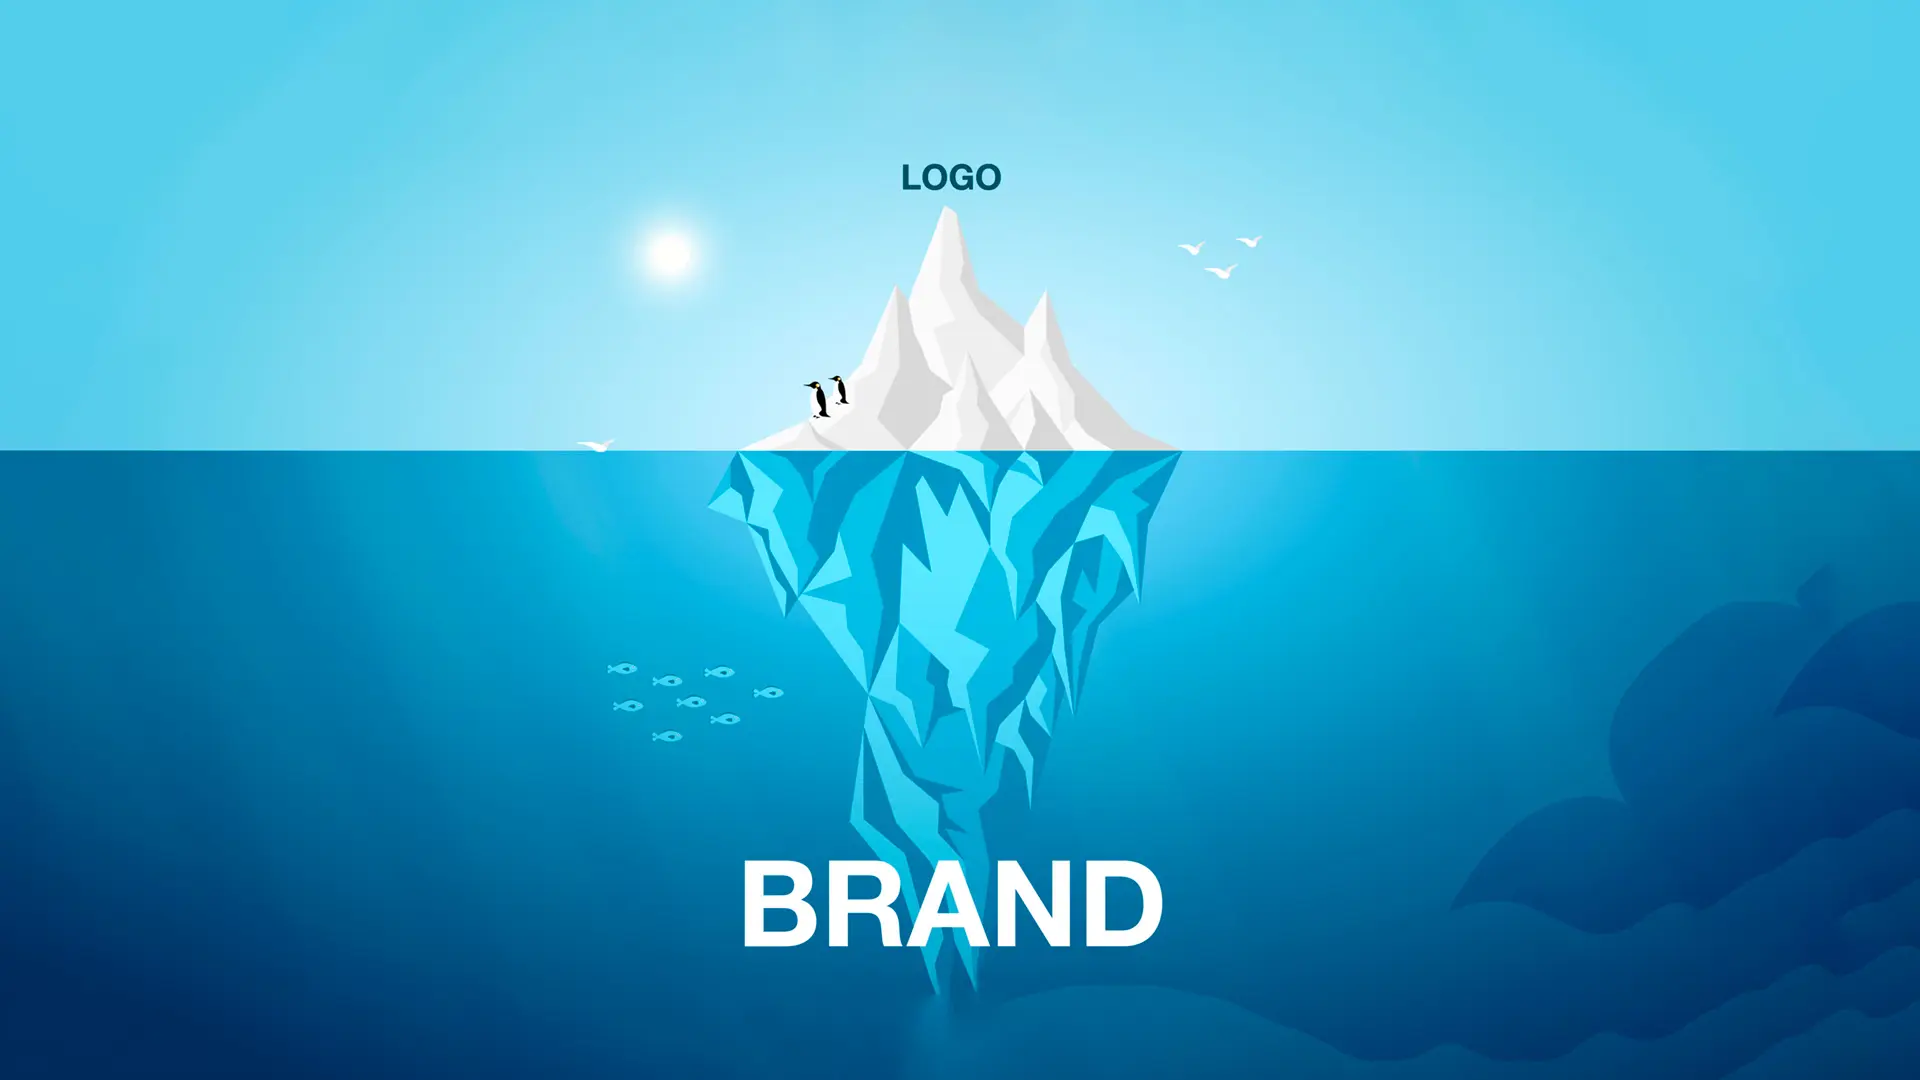 What is brand rollout plan?